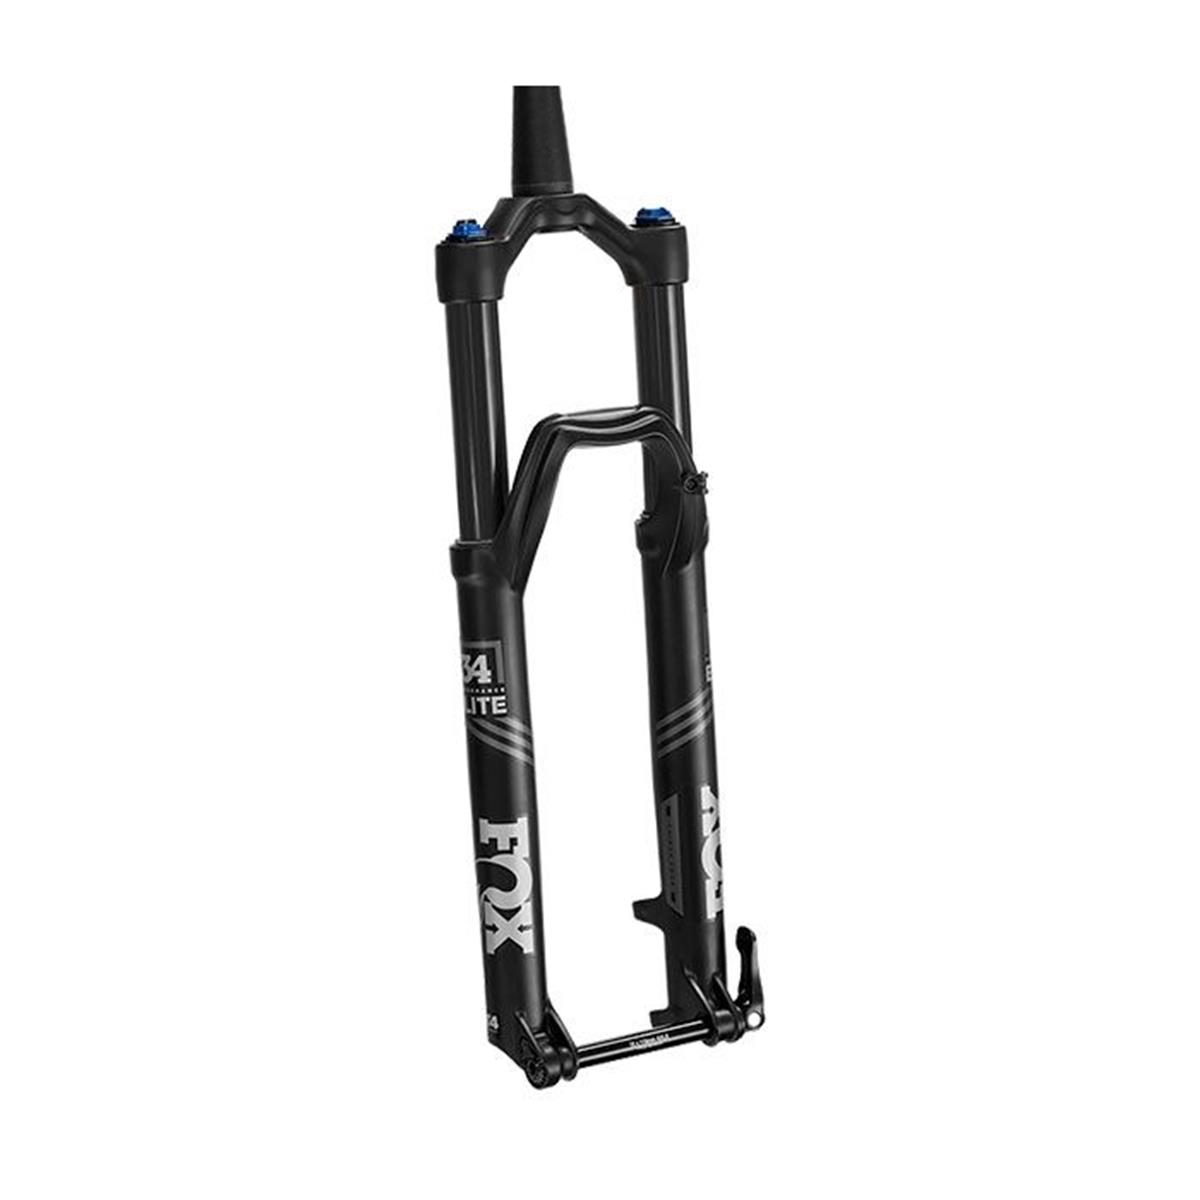 Fox Racing Shox Forcella 34 Float Performance Elite 2019, 27,5 Inch, 15 x 110 mm, FIT4